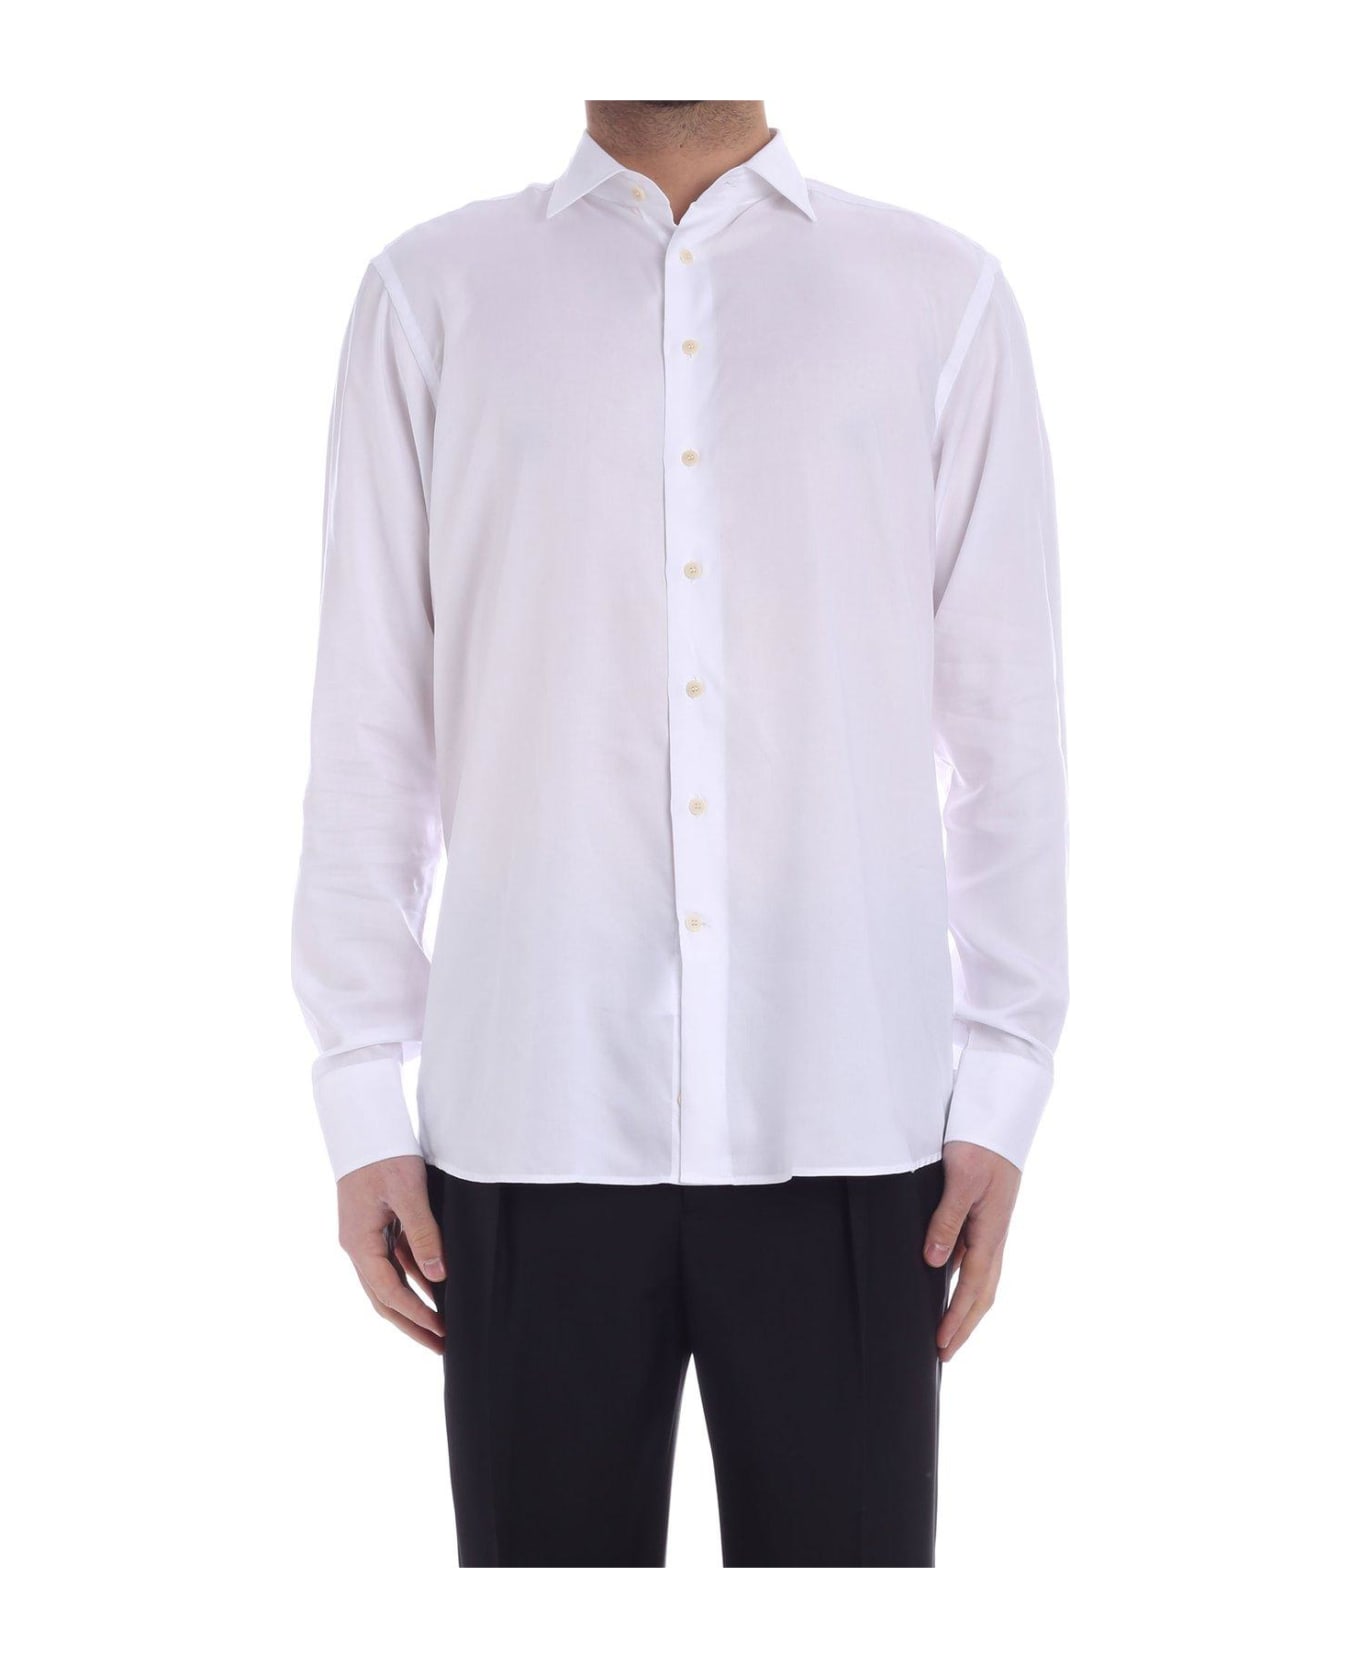 Etro Buttoned-up Long-sleeved Shirt - Bianco シャツ